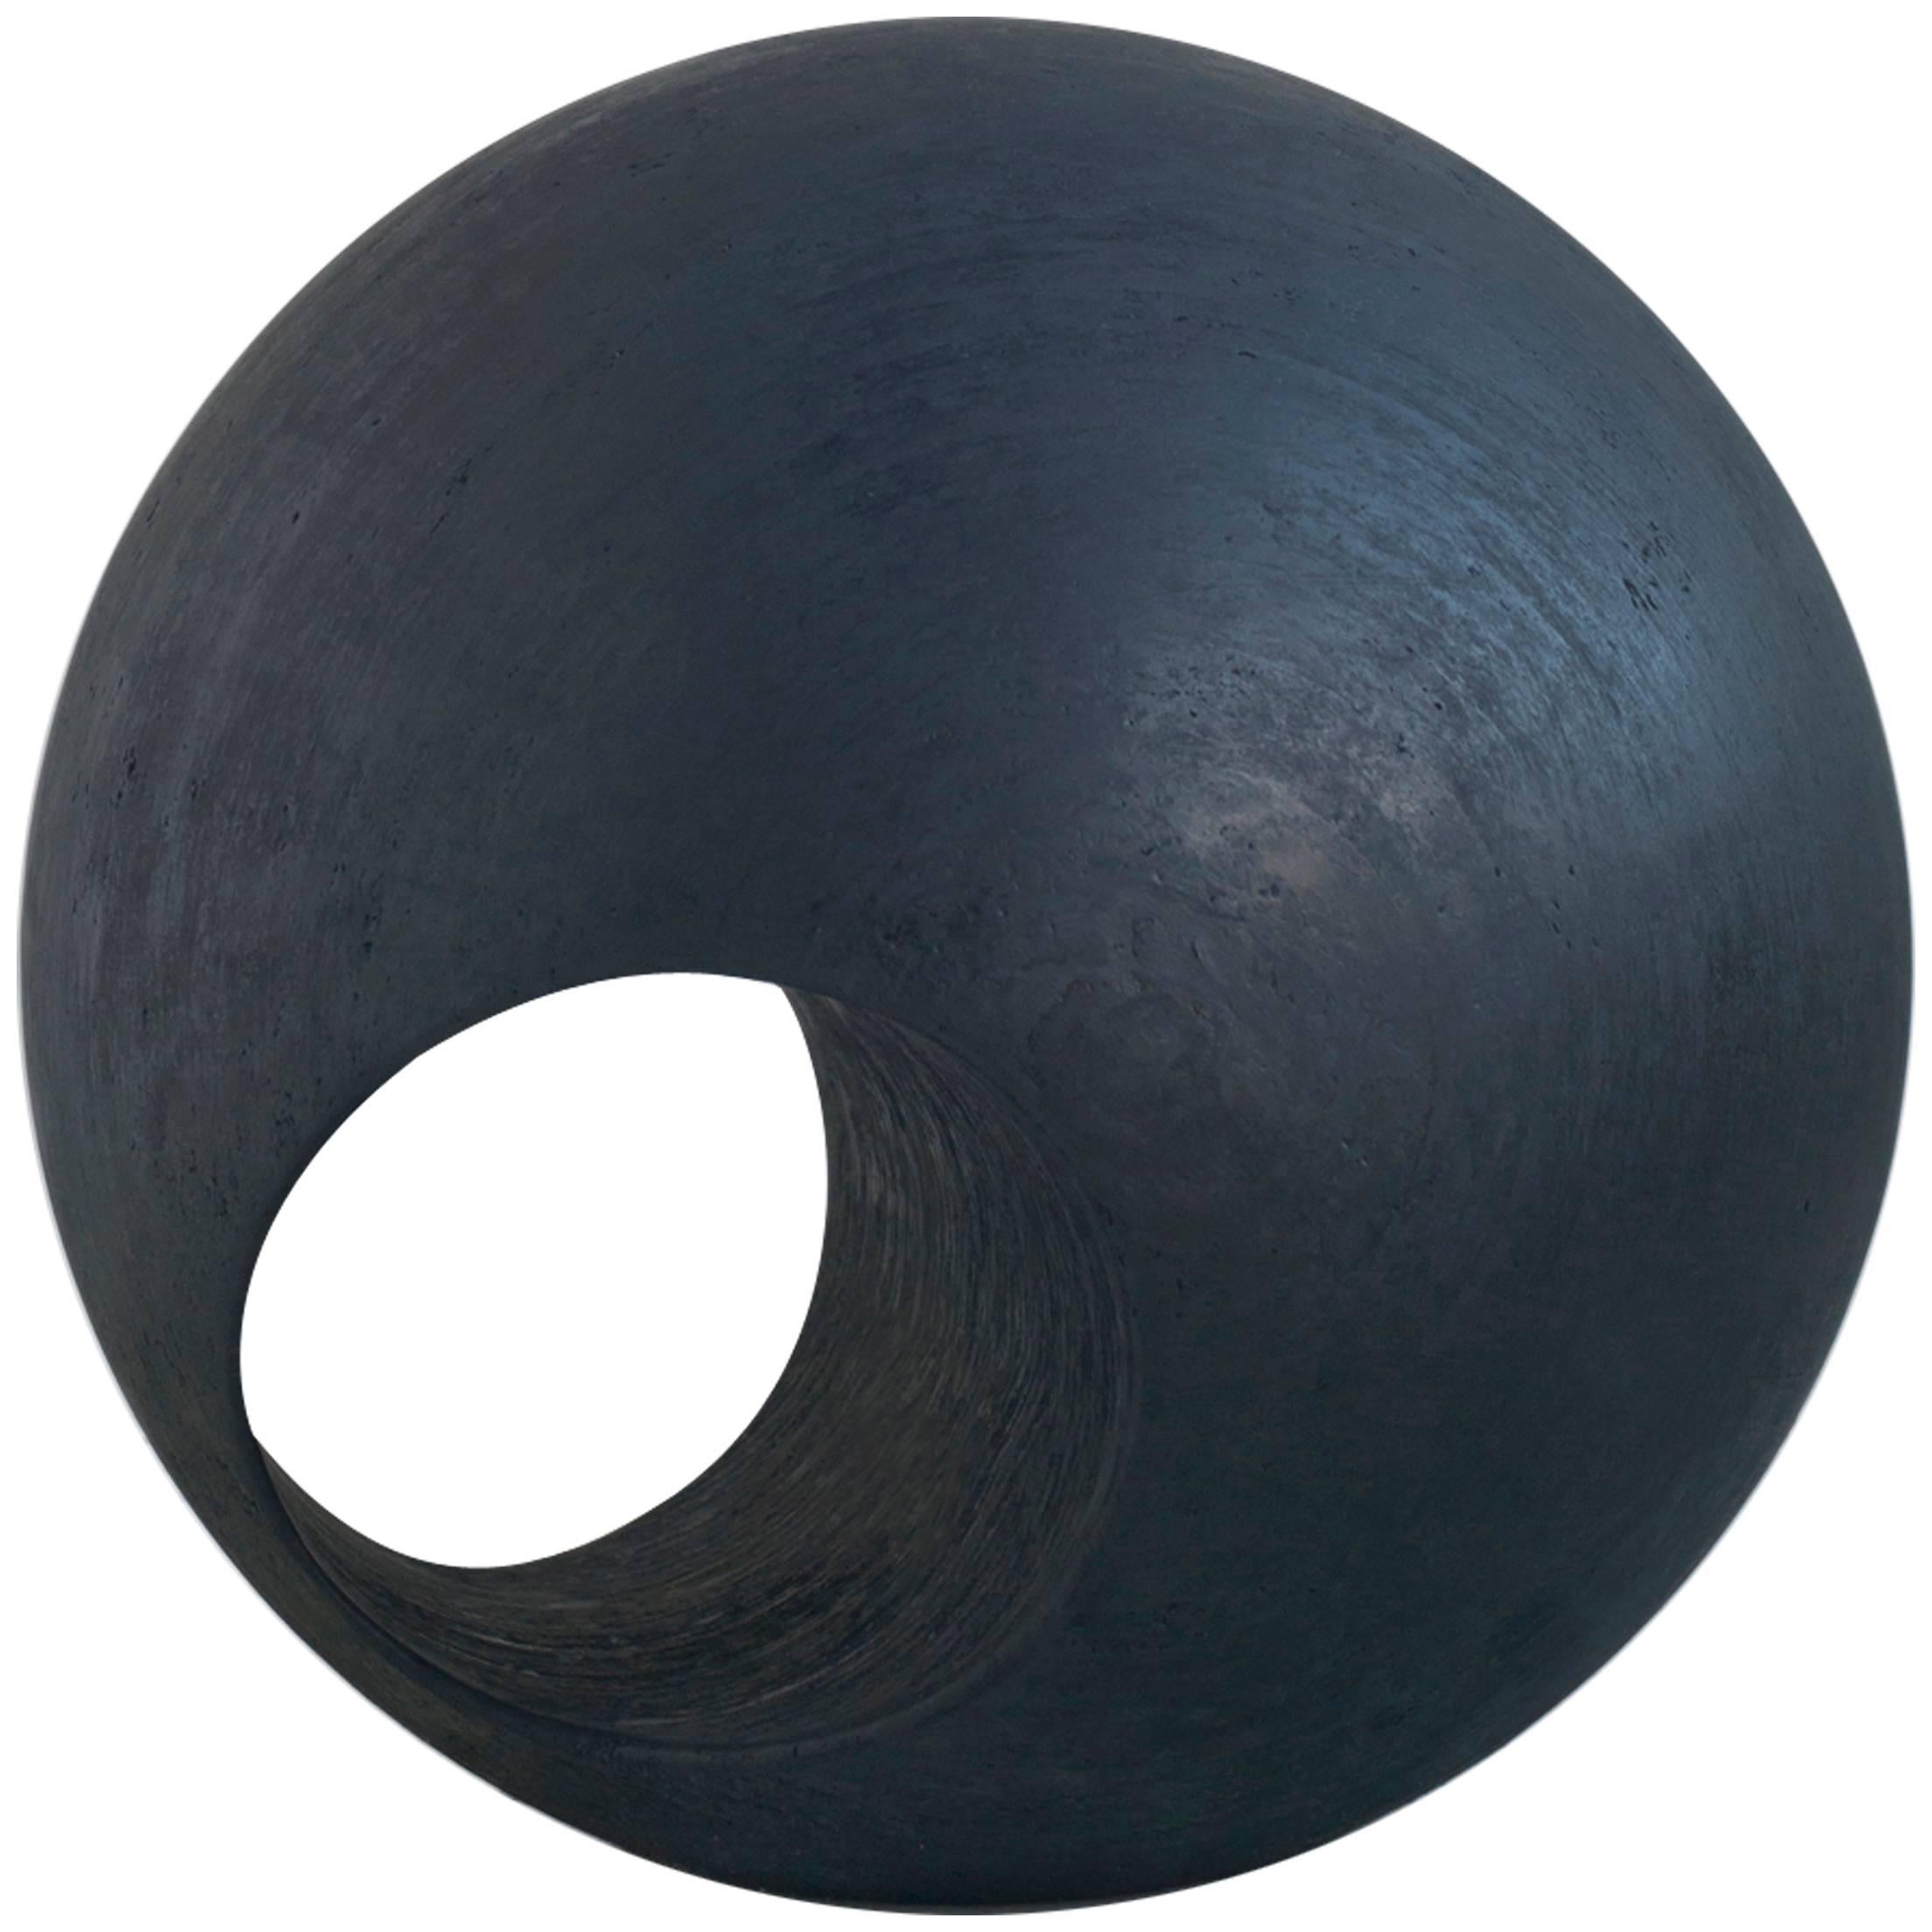 24" R Sculptural Wood Sphere by May Furniture